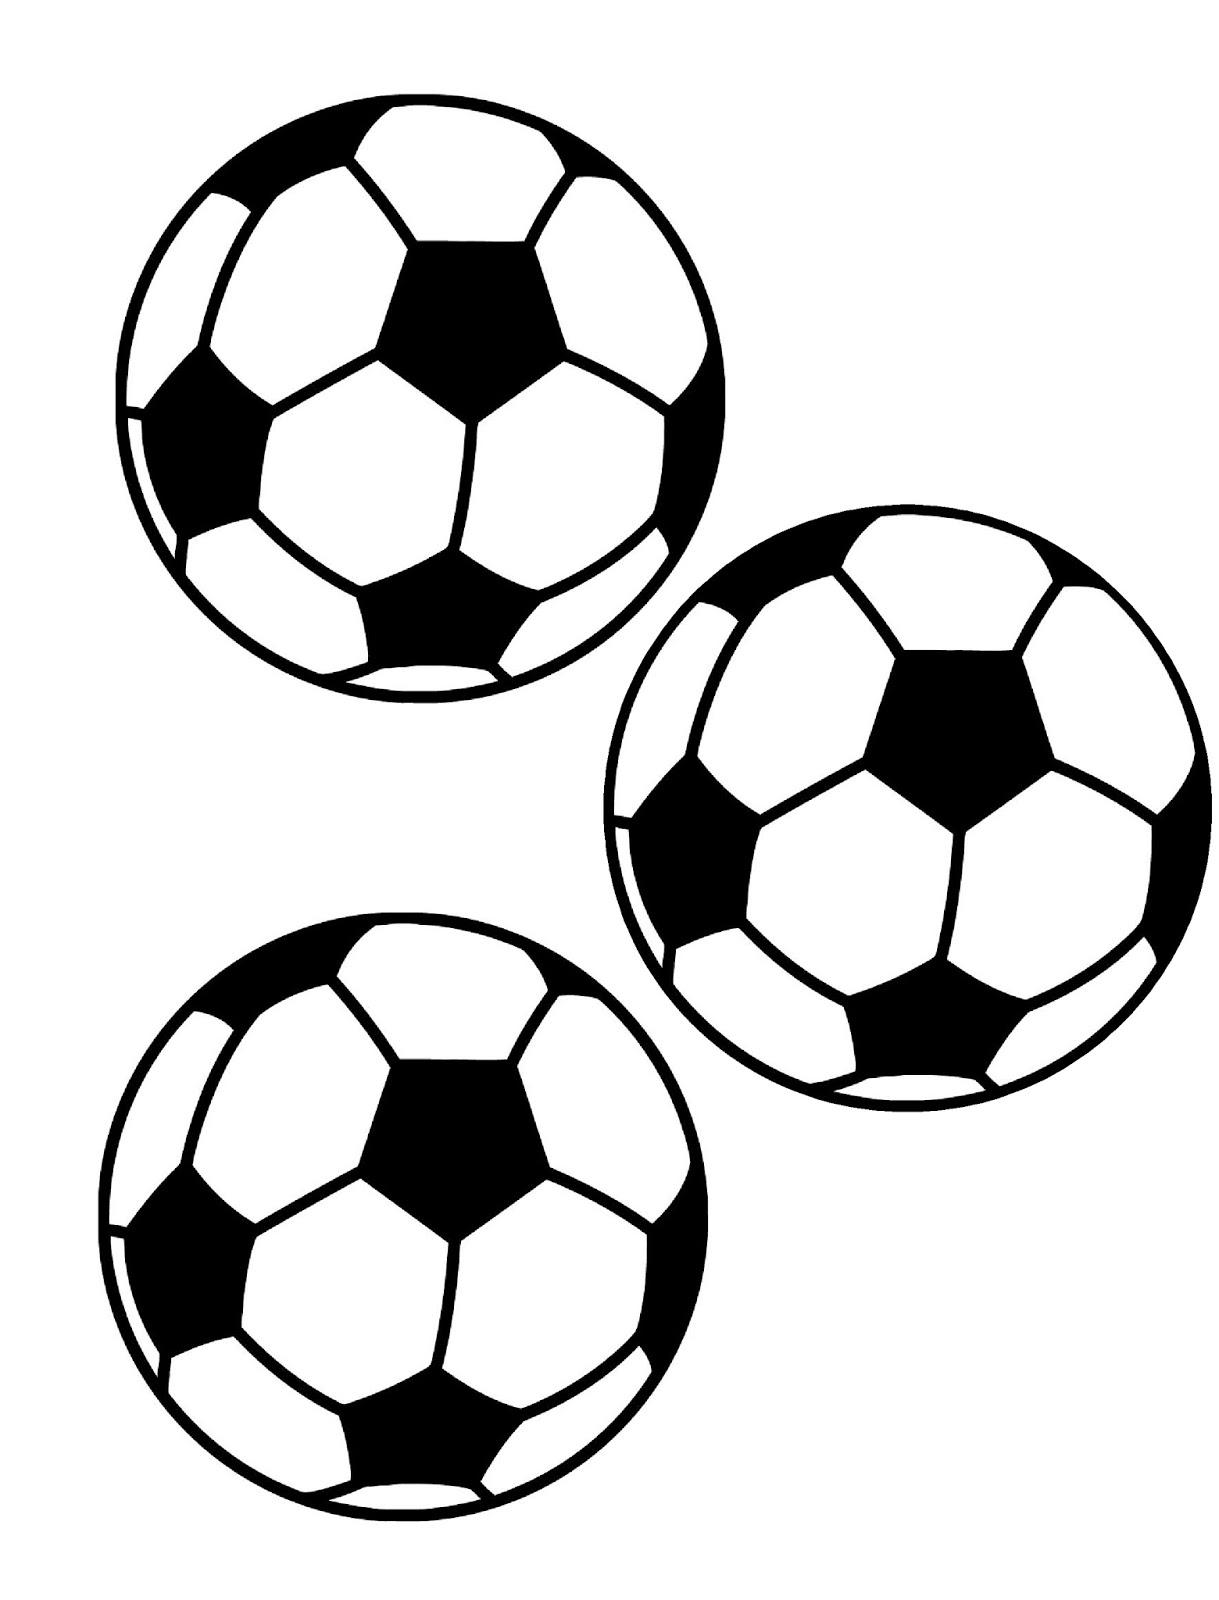 Free Printable Soccer Images